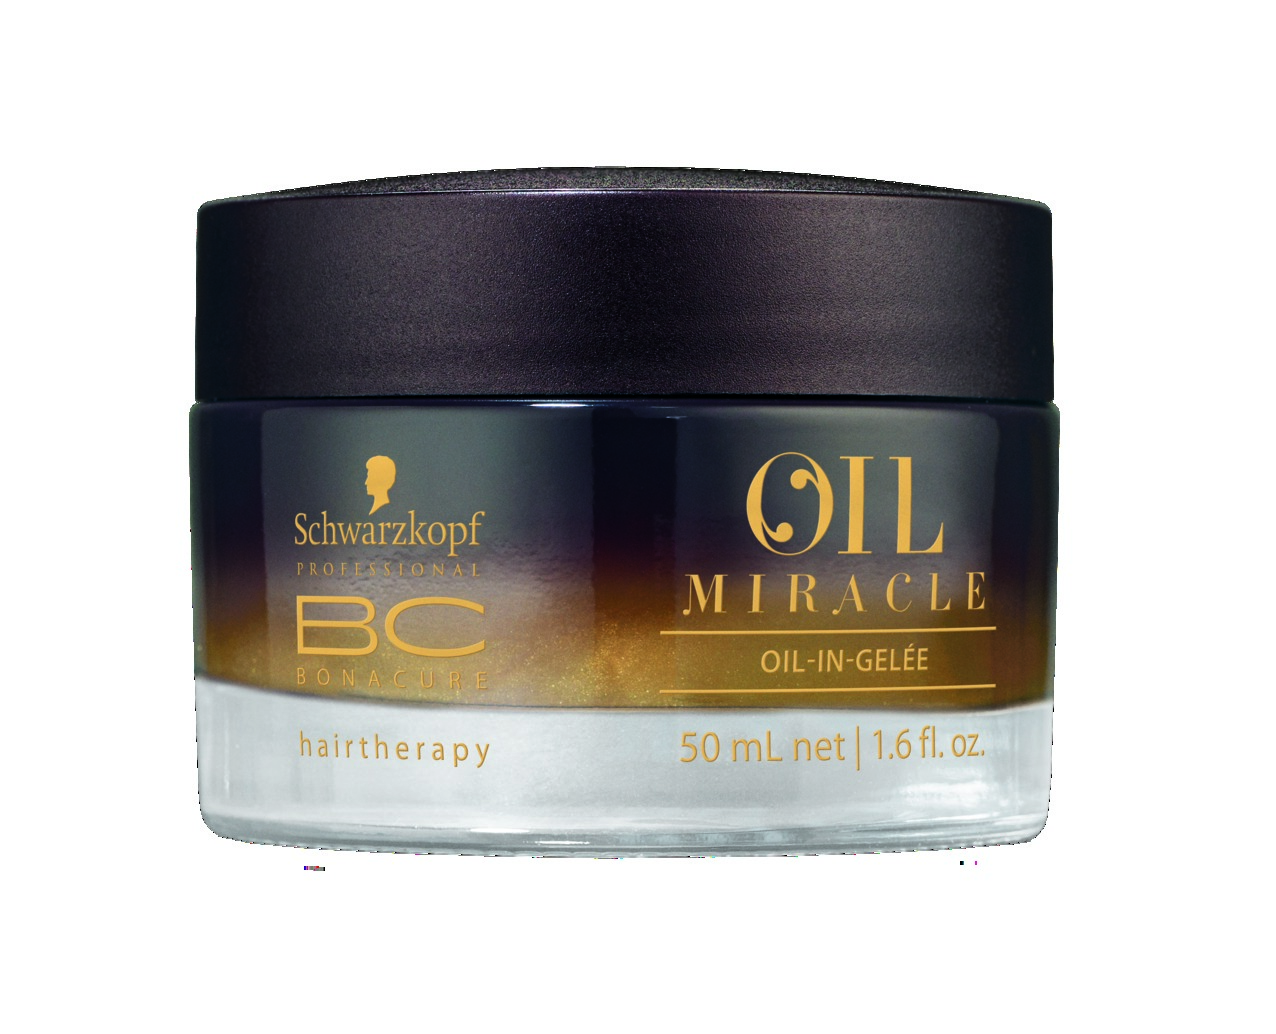 SCHWARZKOPF PROFESSIONAL Желе масляное / BC Oil Miracle 50 м